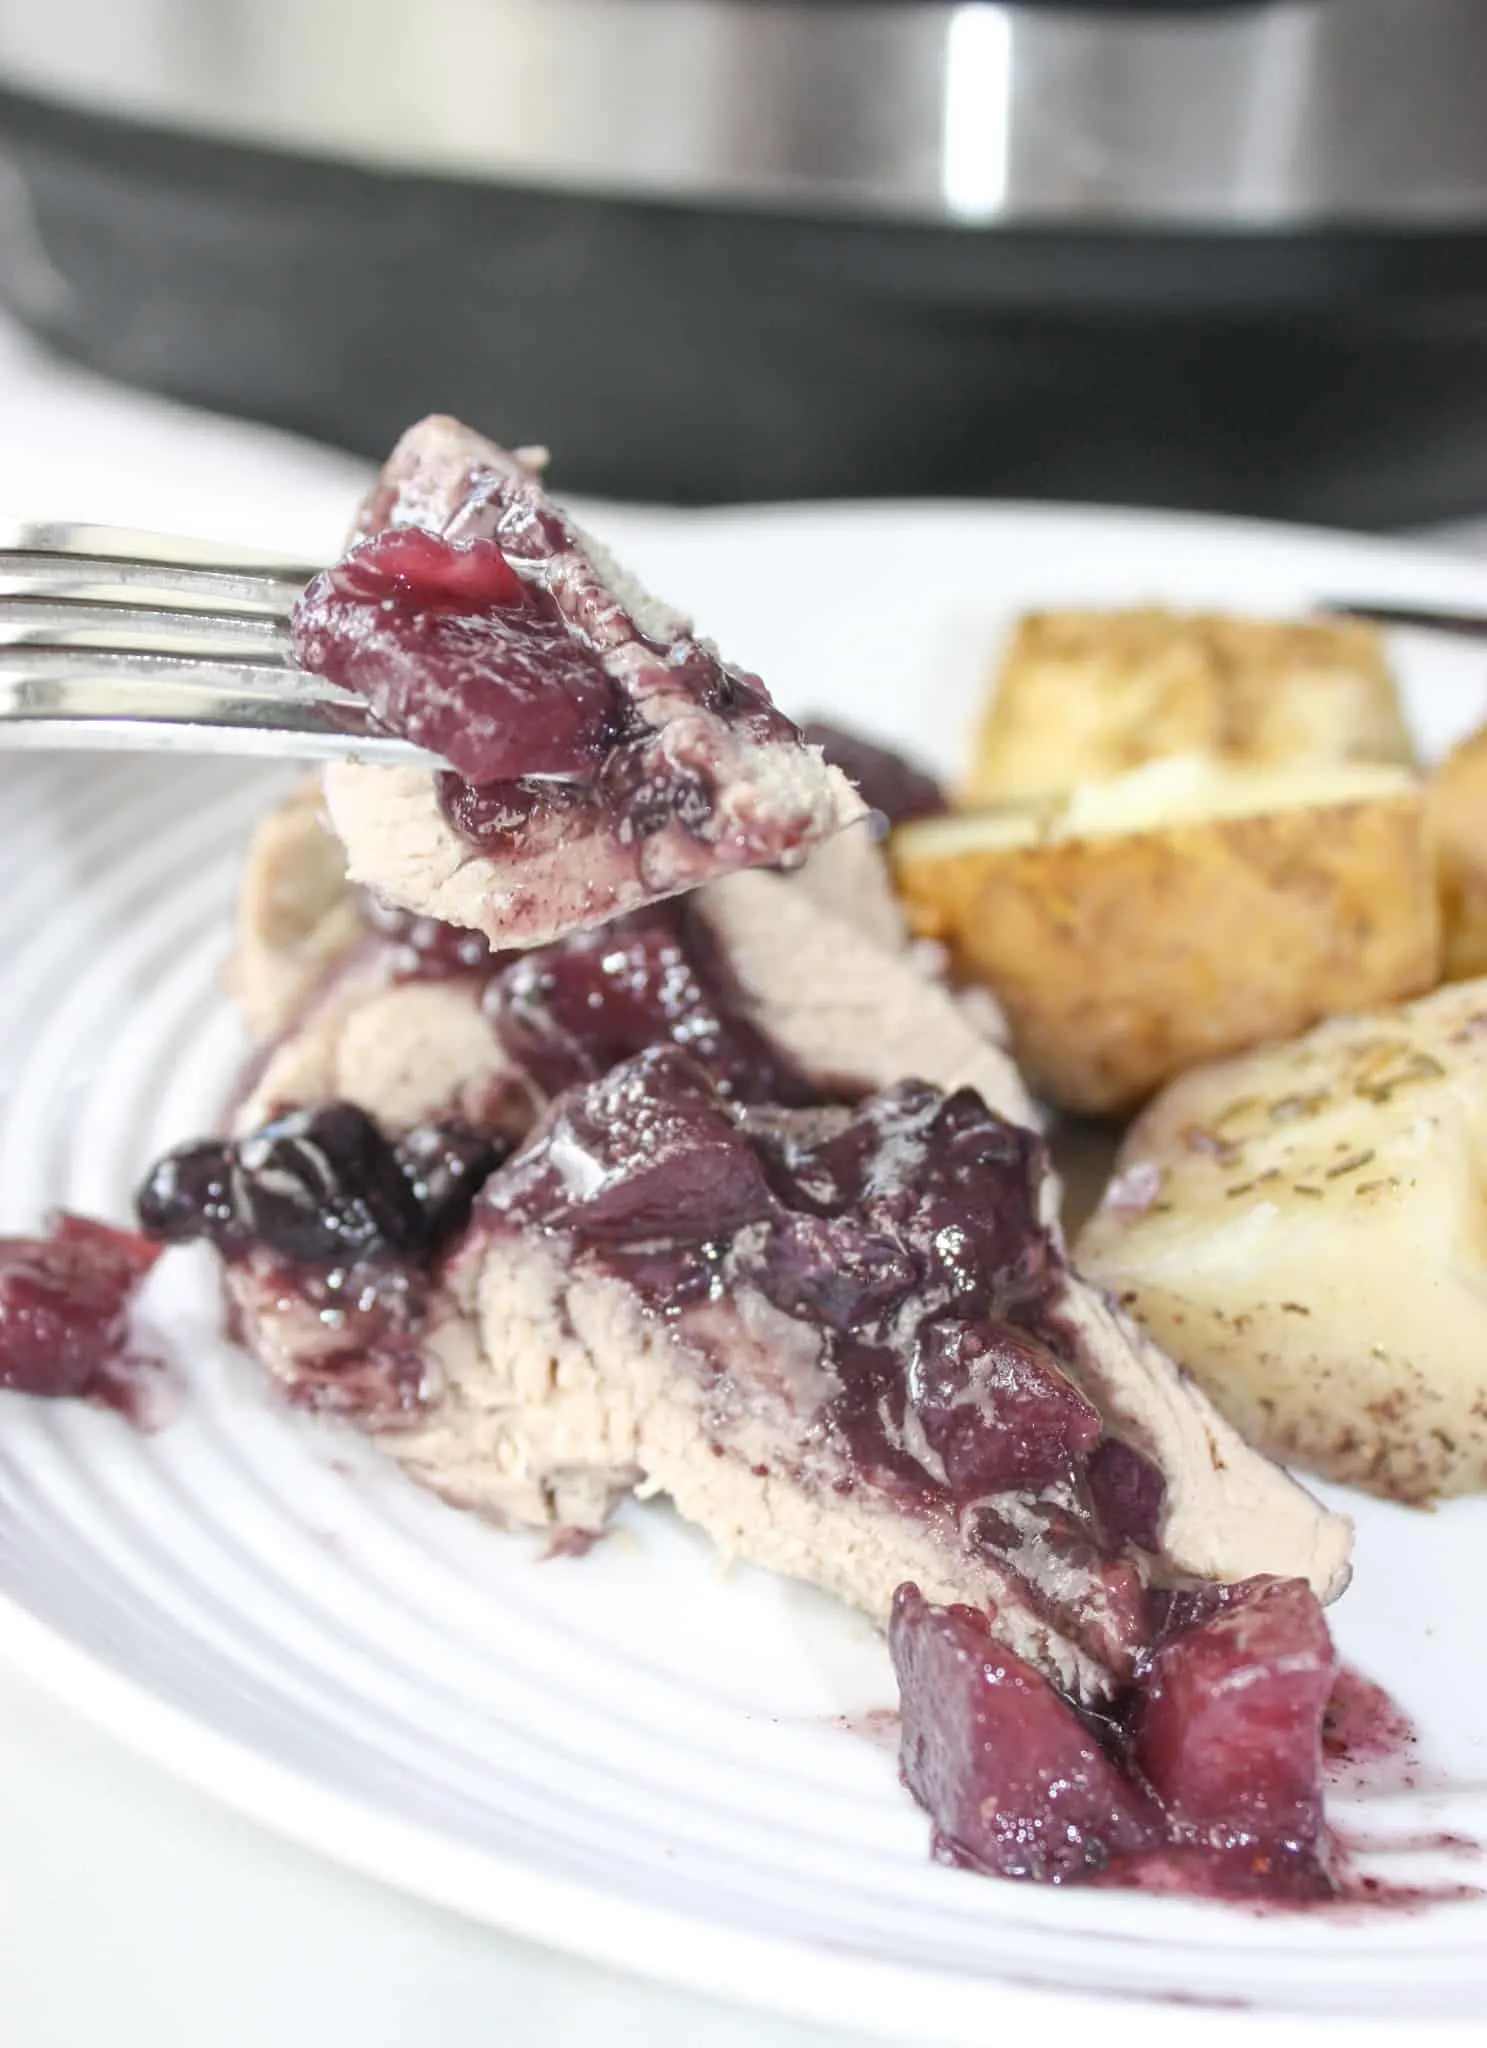 Blueberry Apple Pork Tenderloin & Potatoes is a recipe that will have people thinking you spent a great deal of time in the kitchen.